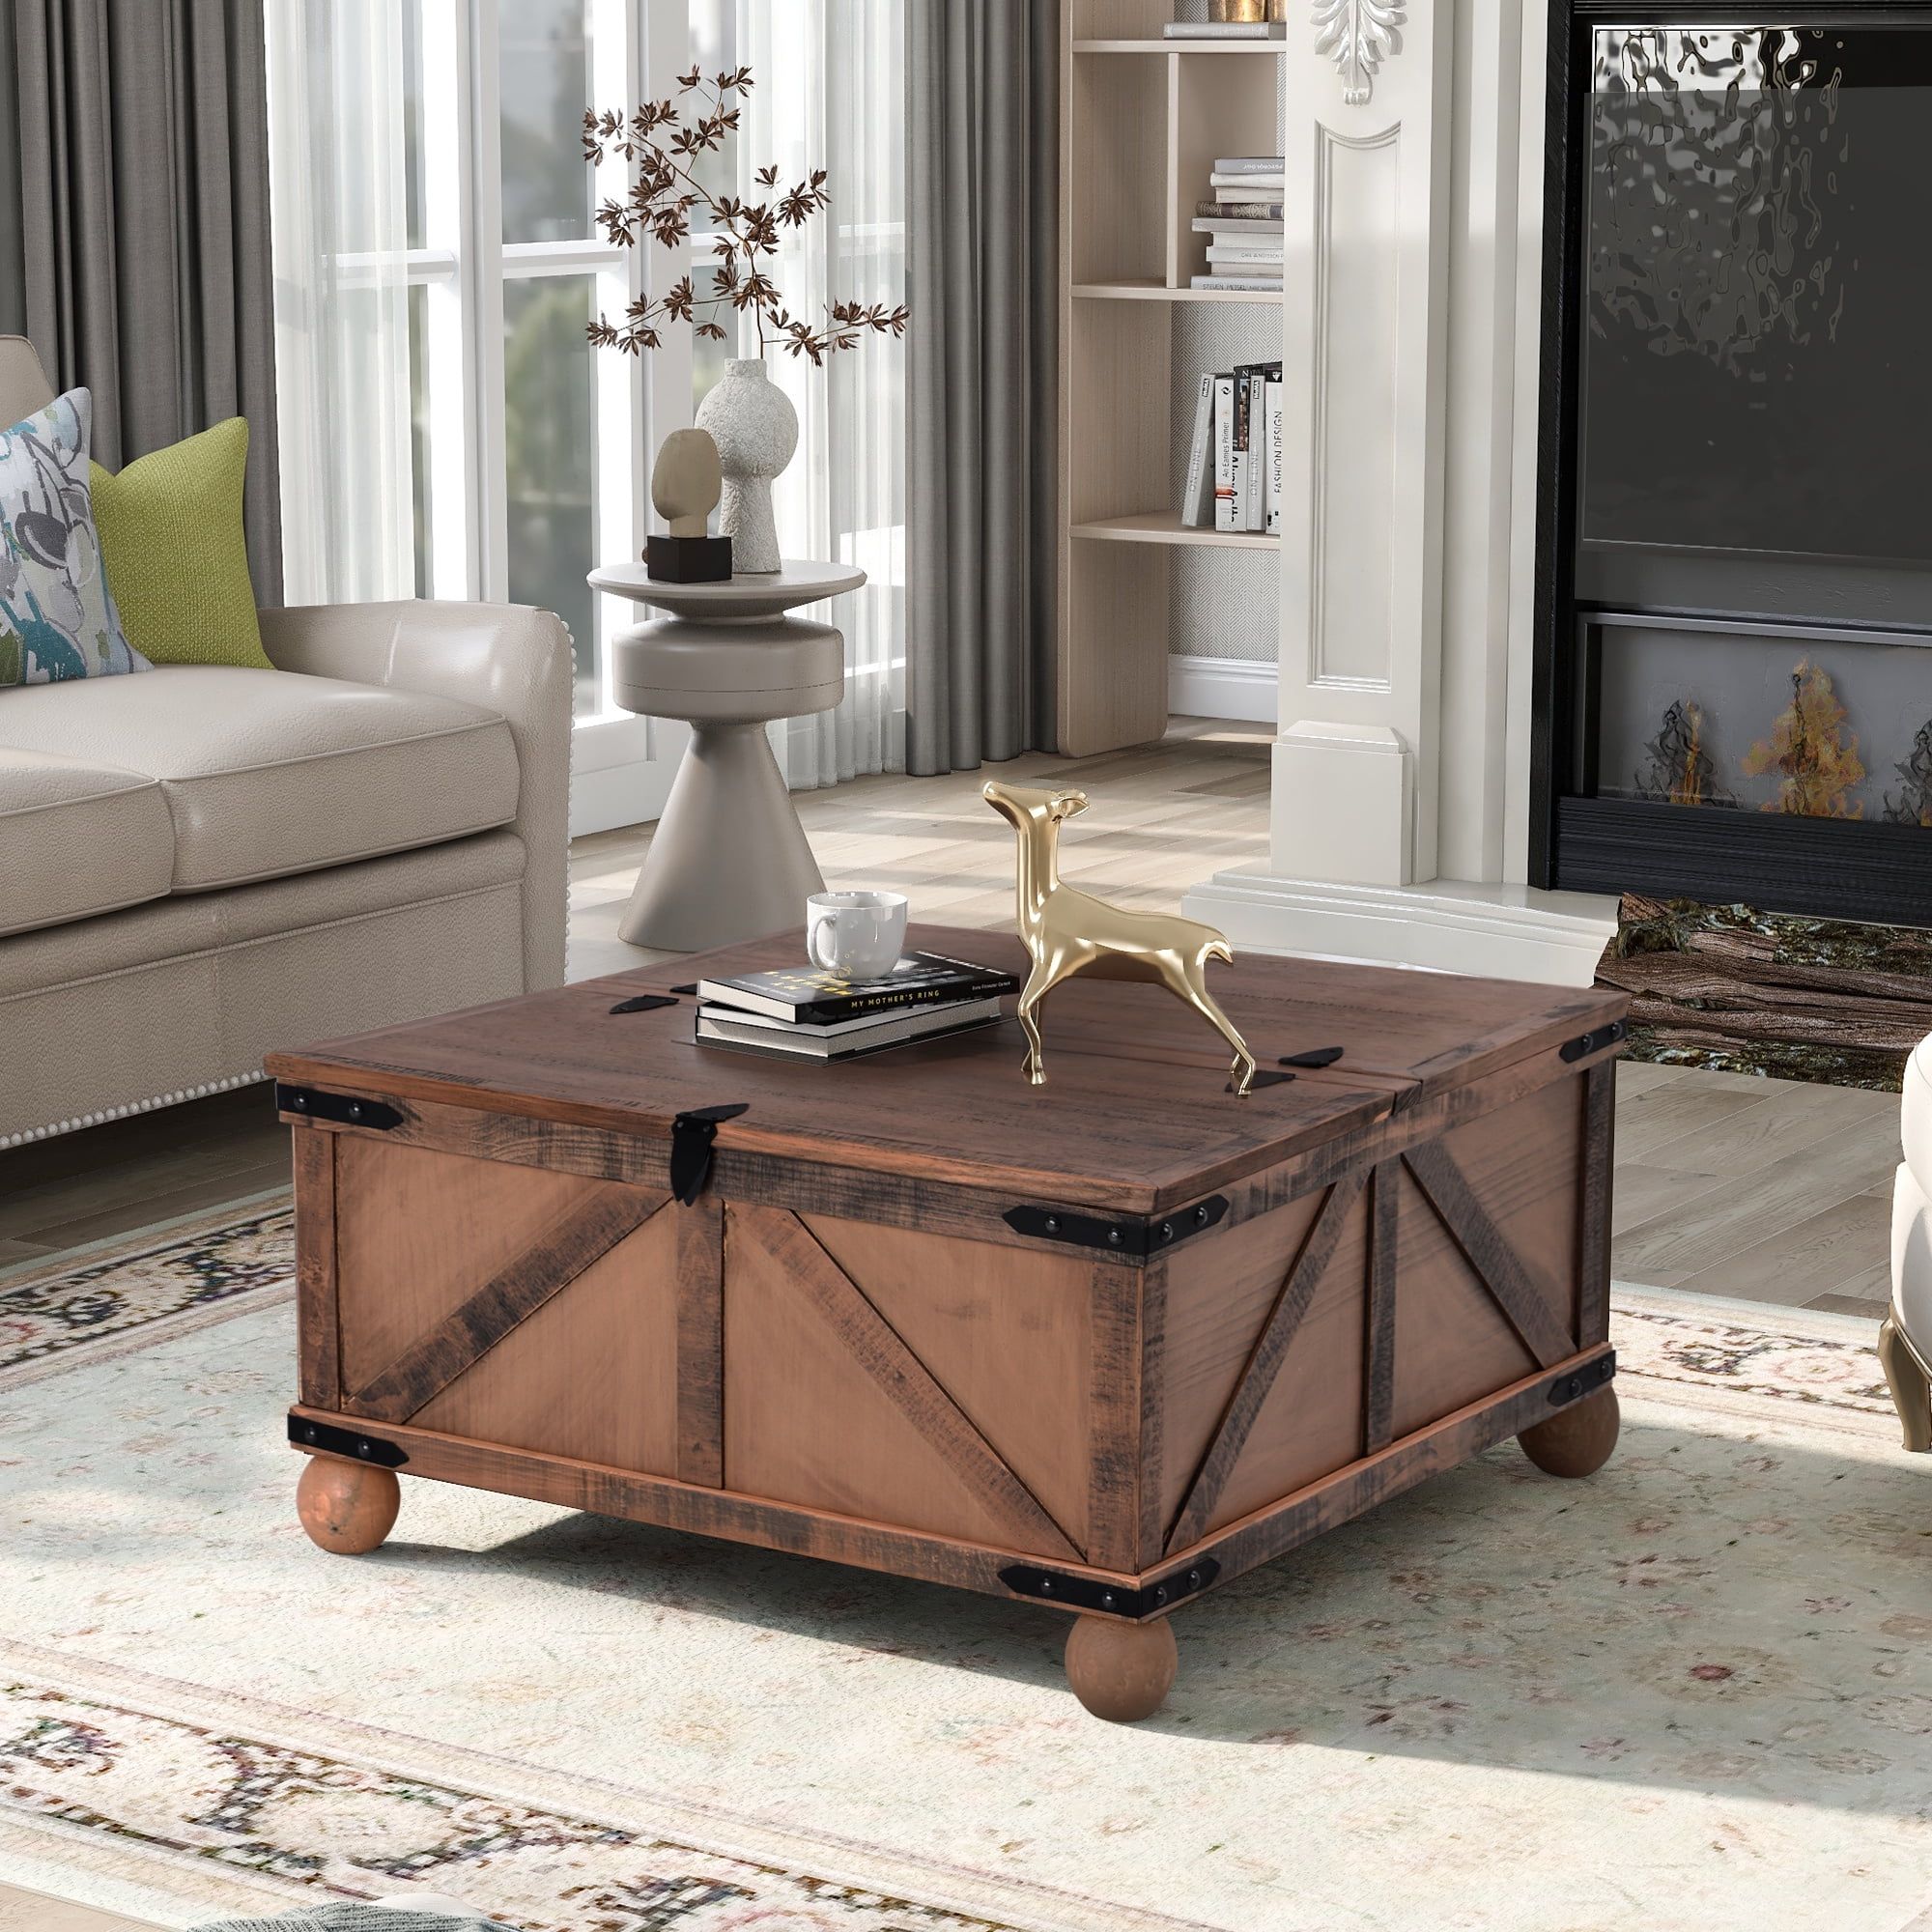 Farmhouse Square Coffee Table With Lift Top For Storage, Brown Within Farmhouse Lift Top Tables (View 7 of 20)